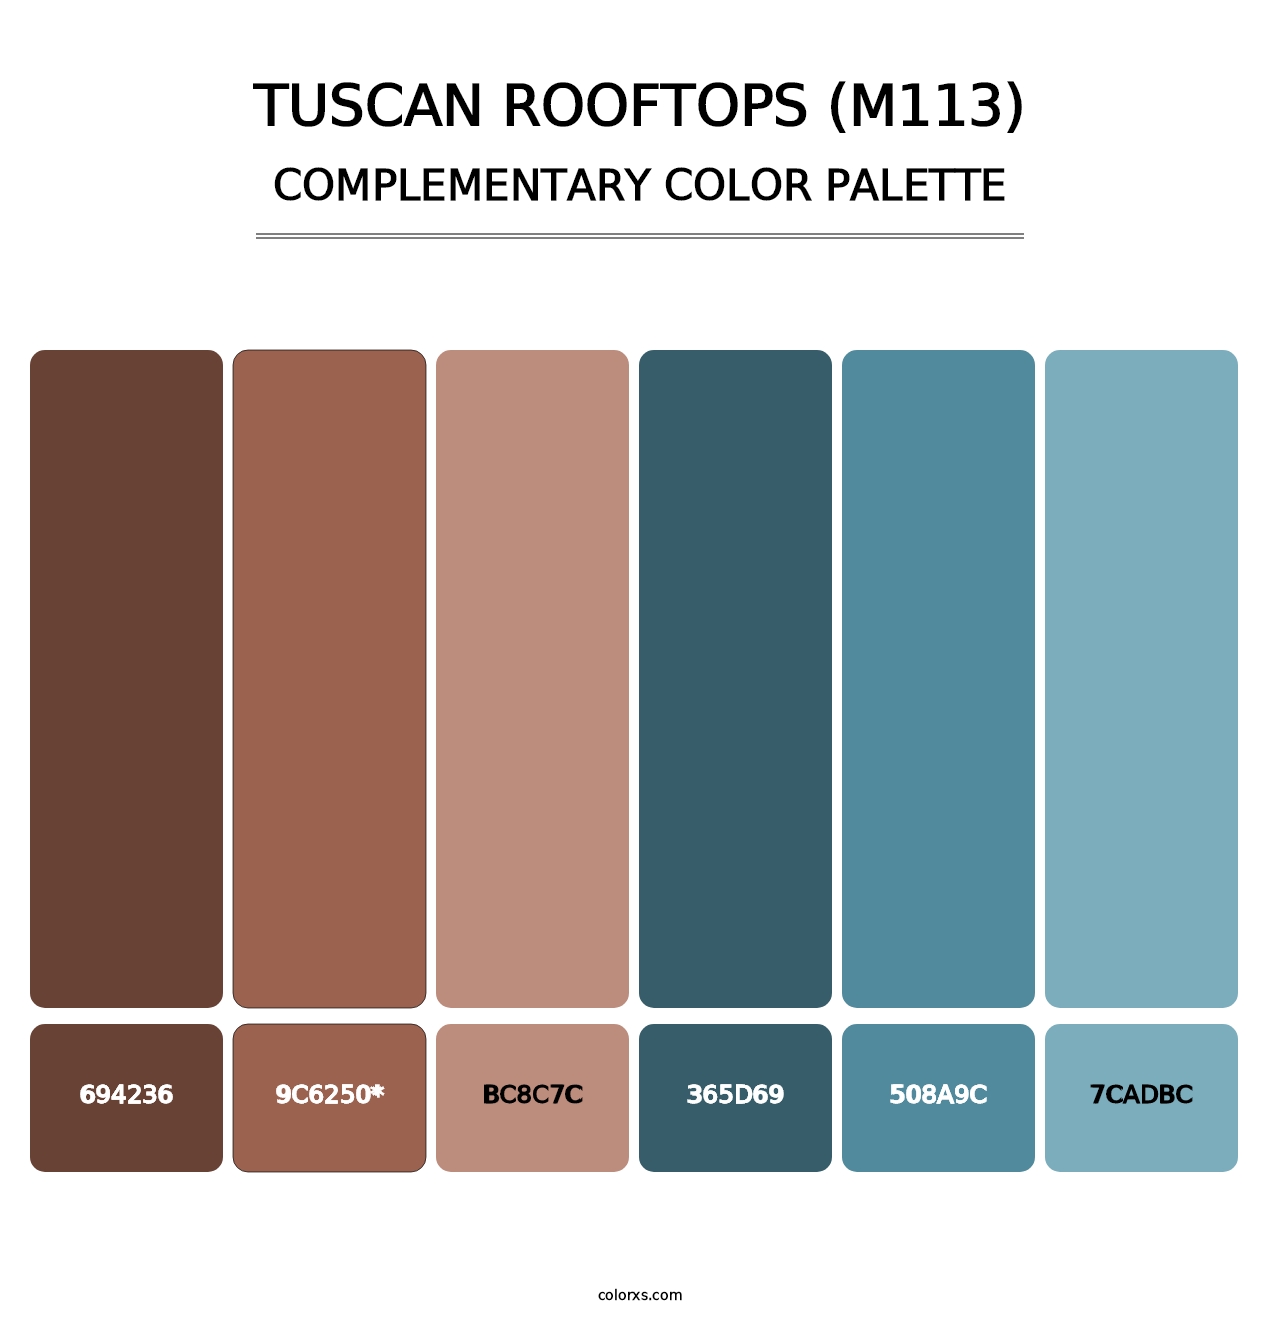 Tuscan Rooftops (M113) - Complementary Color Palette